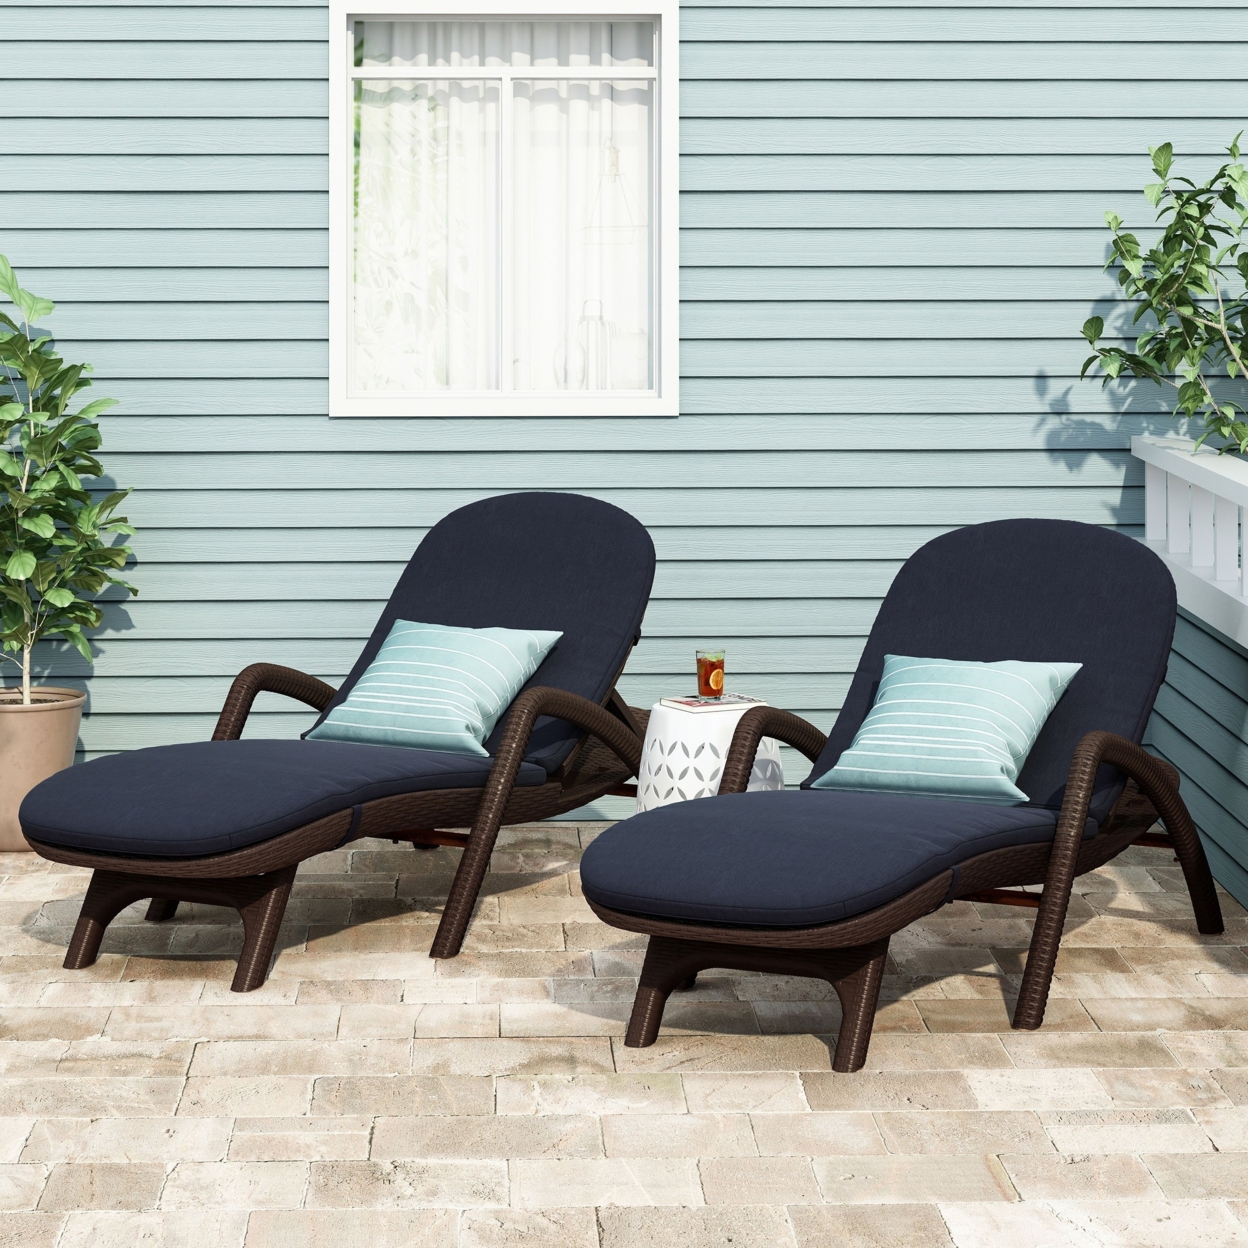 Riley Outdoor Faux Wicker Chaise Lounges With Cushion (Set Of 2) - Dark Brown/navy Blue